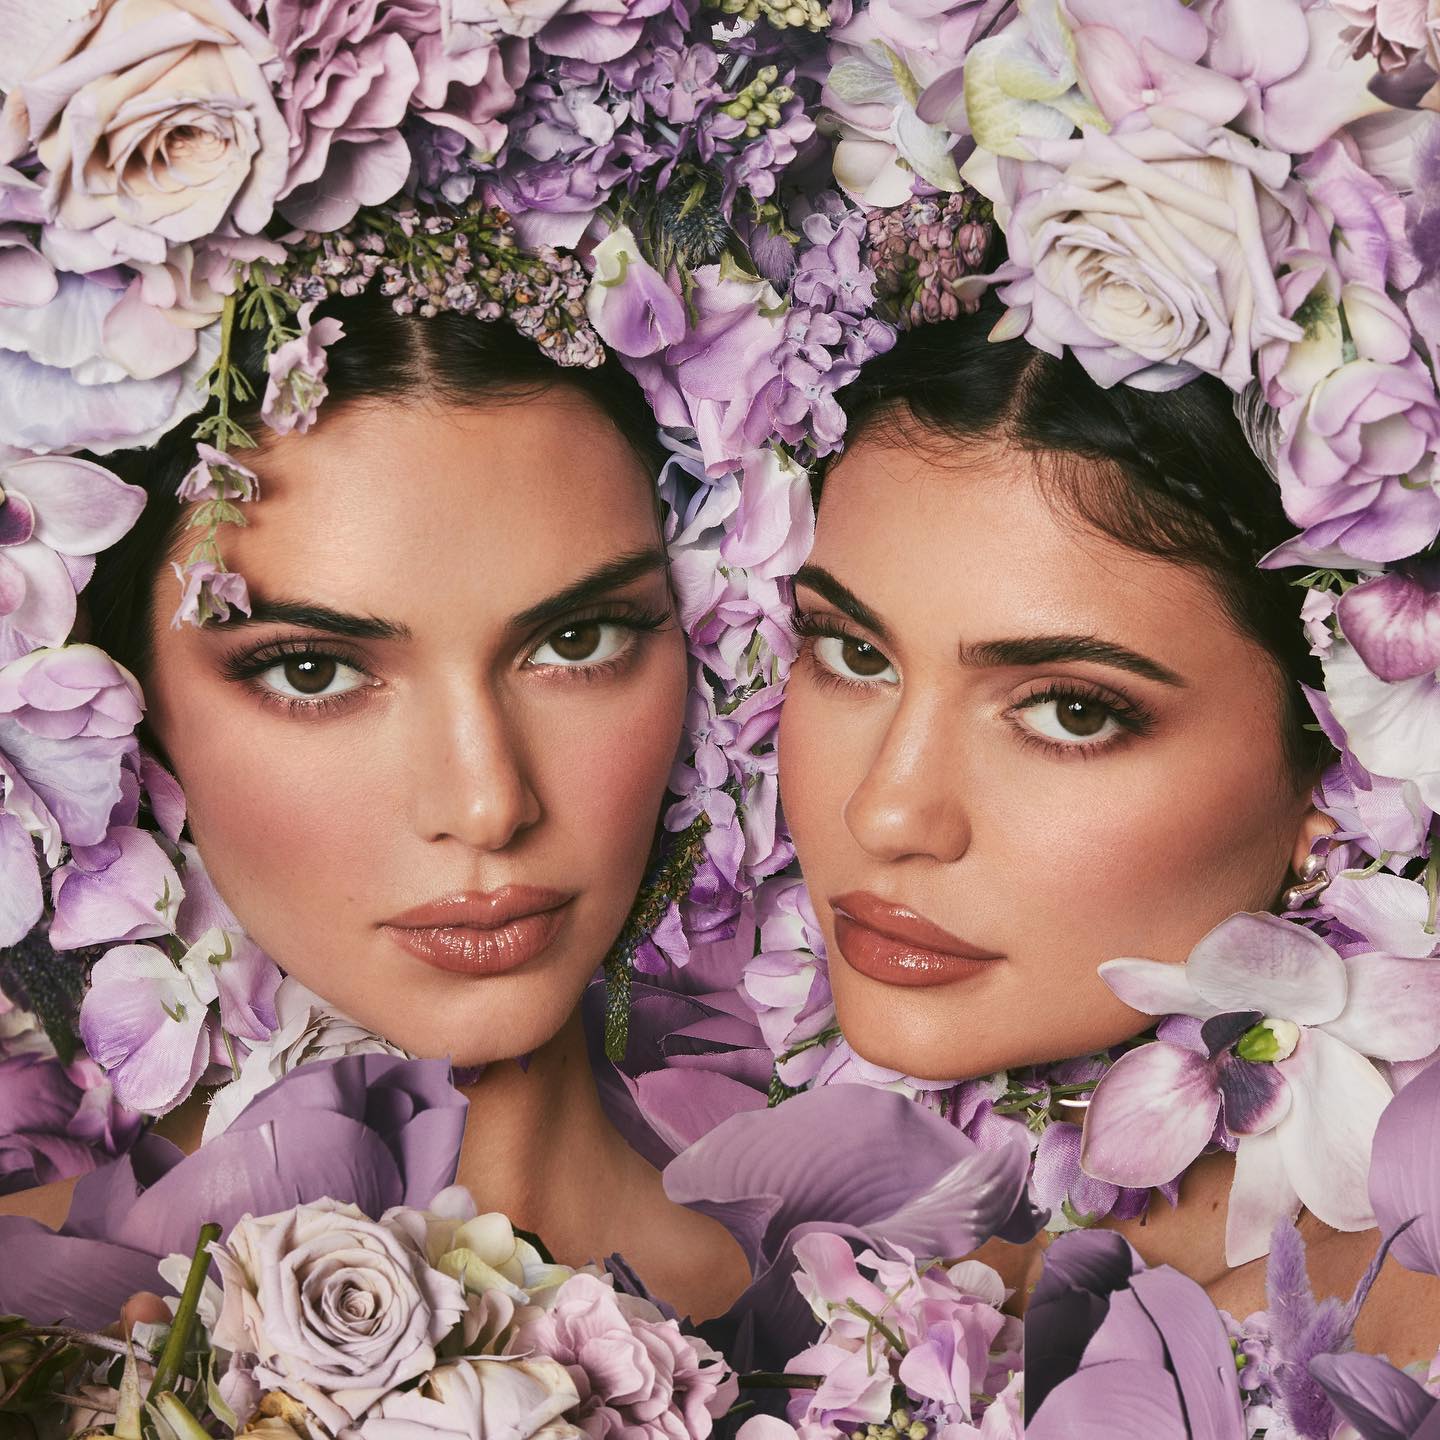 Kylie and Kendall Jenner Are Working On Something New! - Photo 3